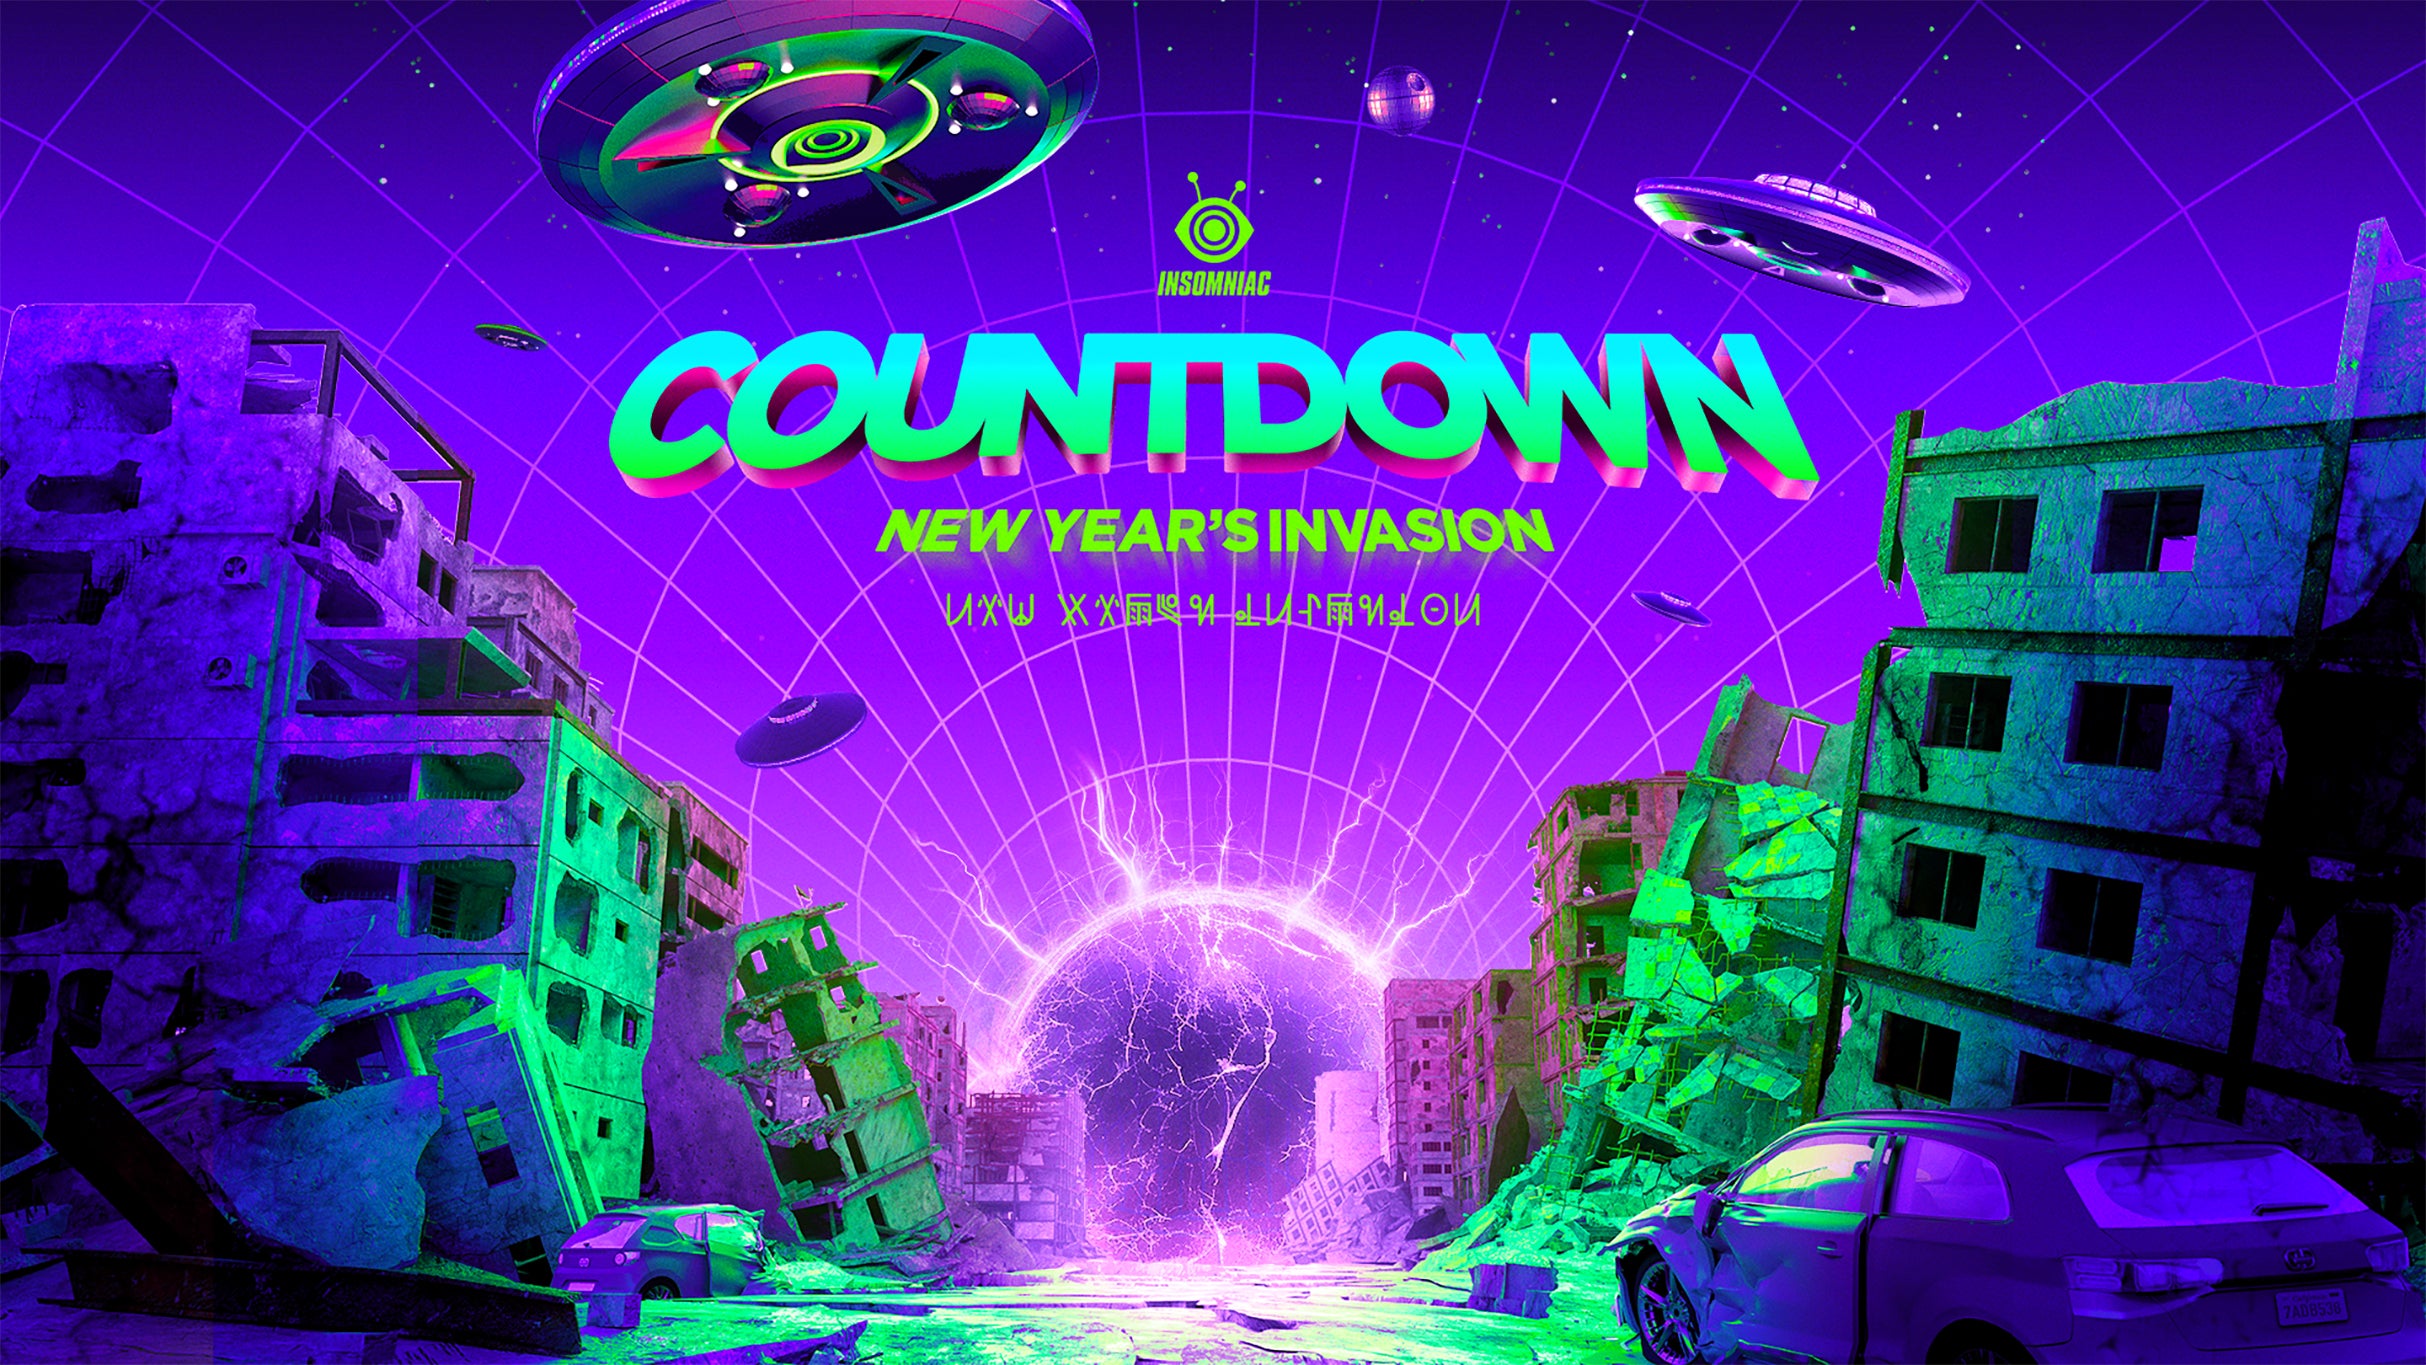 Insomniac Countdown at NOS Events Center